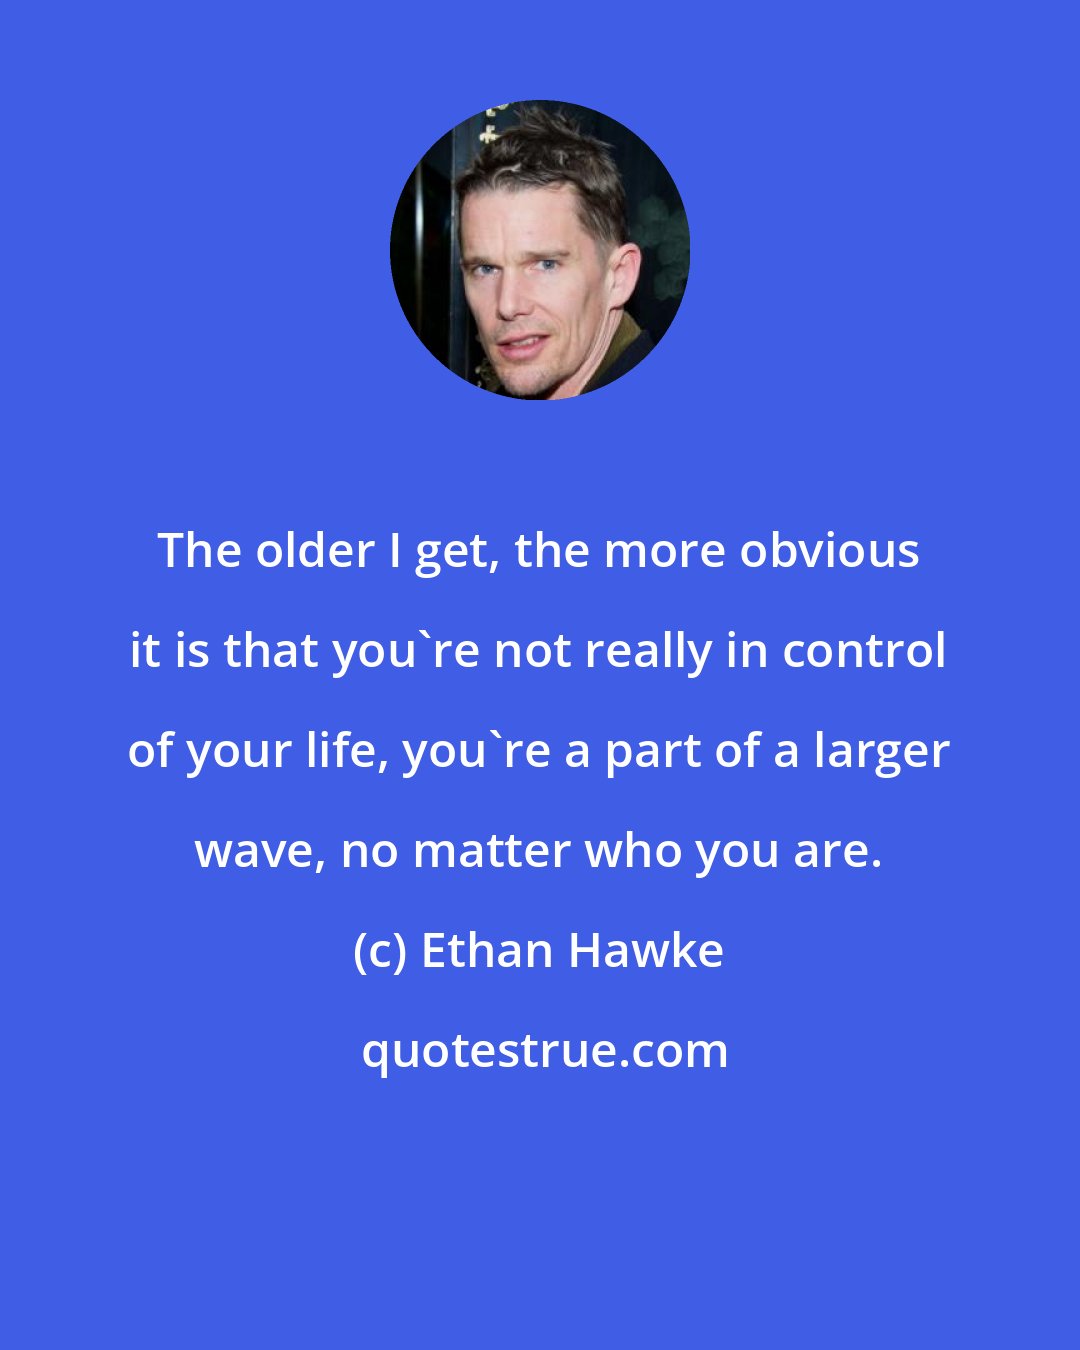 Ethan Hawke: The older I get, the more obvious it is that you're not really in control of your life, you're a part of a larger wave, no matter who you are.